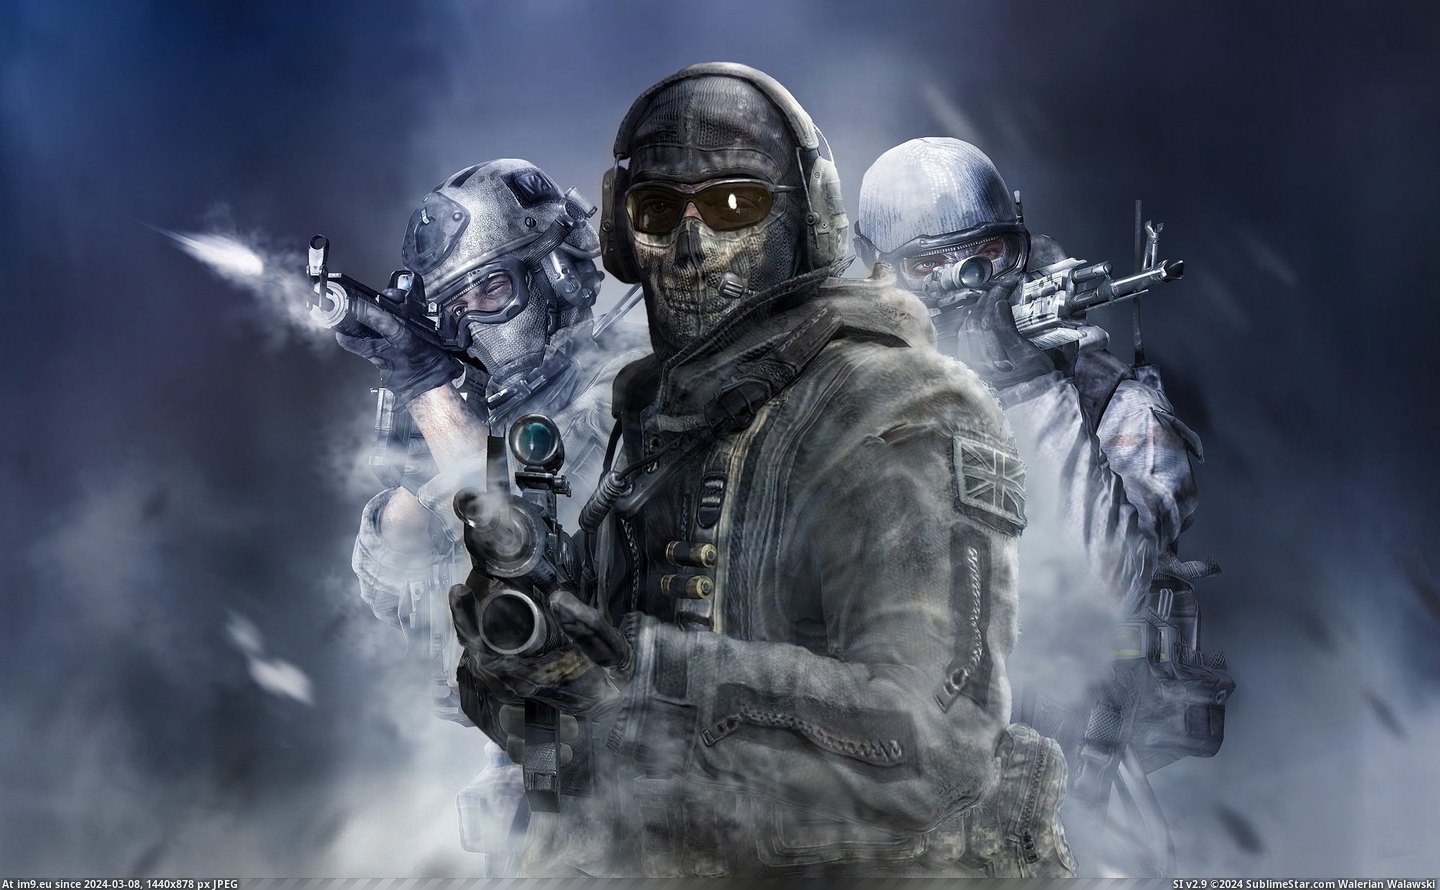 #Game #Duty #Call #Video Video Game Call Of Duty 102917 Pic. (Bild von album Games Wallpapers))